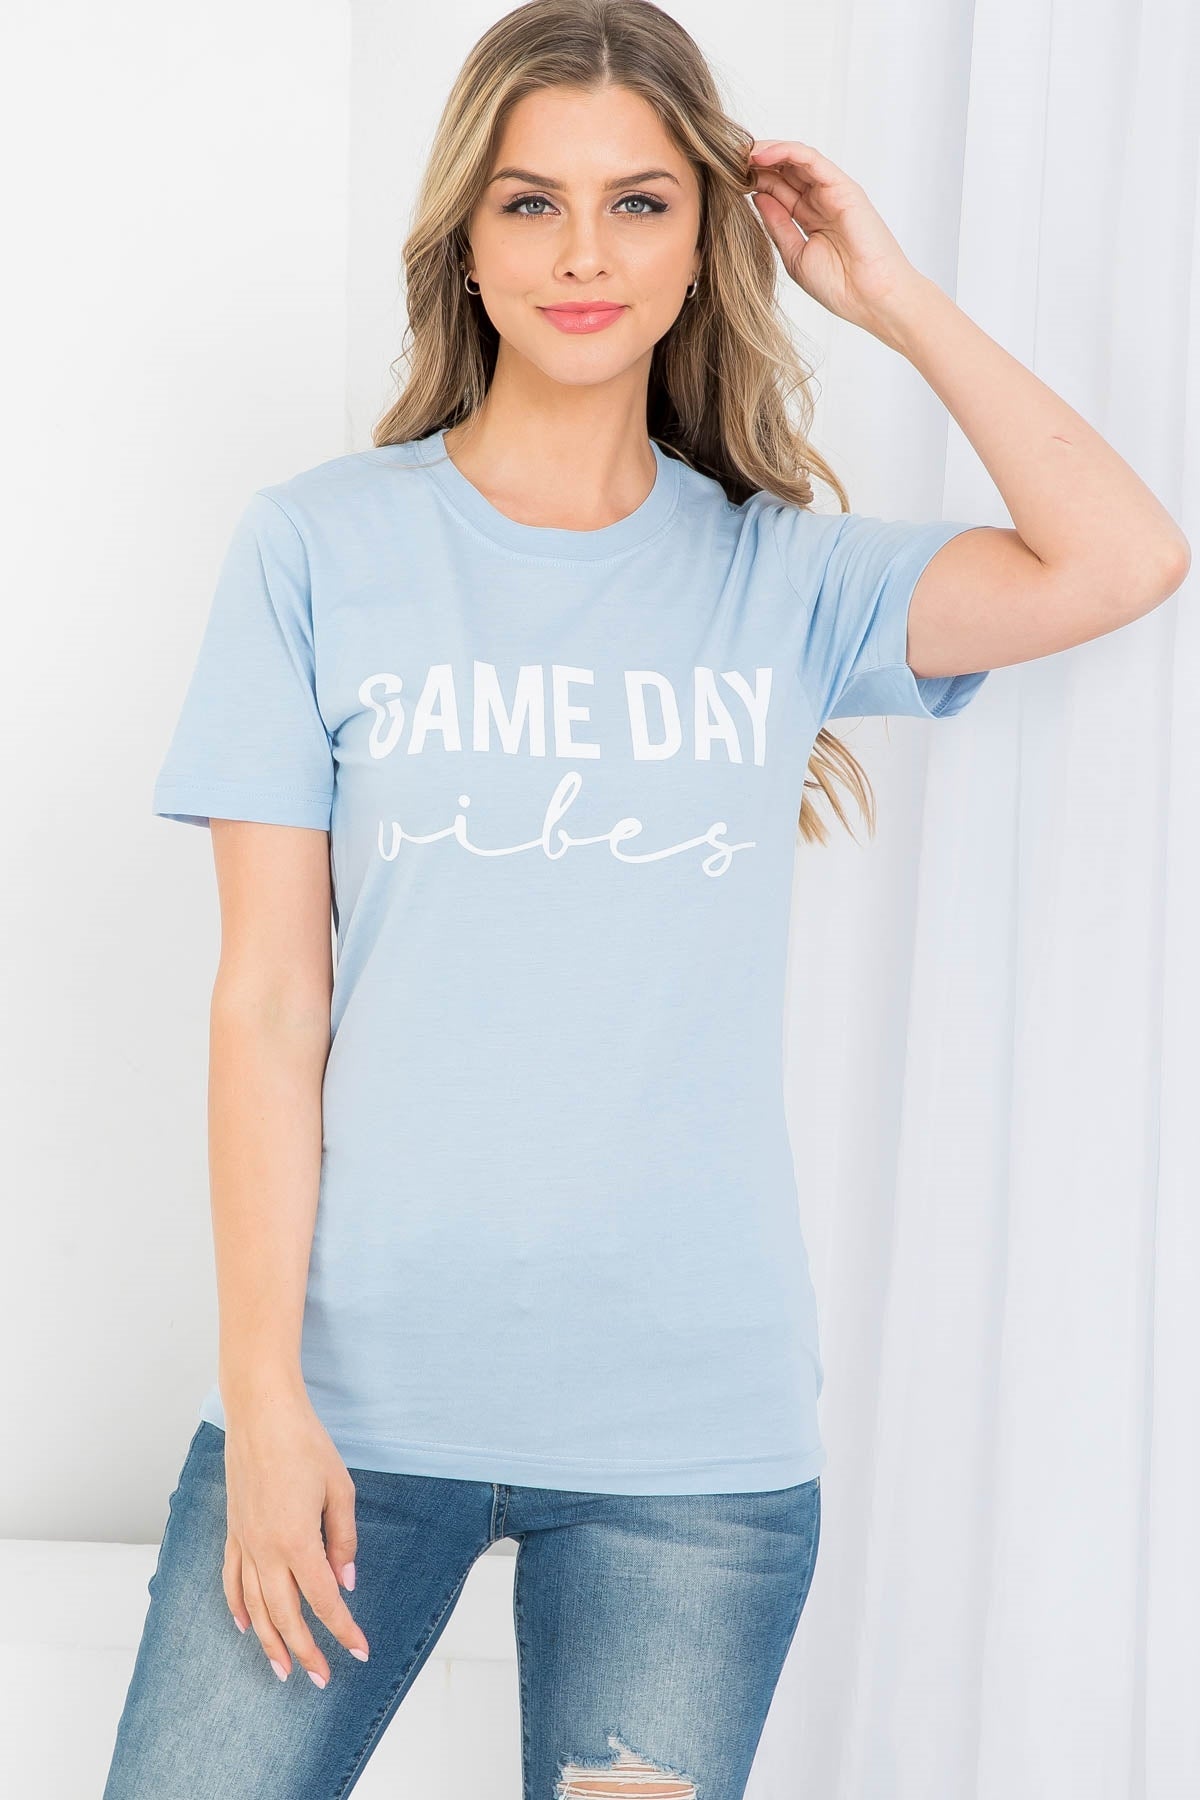 BABY BLUE "GAME DAY VIBES" GRAPHIC TEE TOP (NOW $4.00 ONLY!)